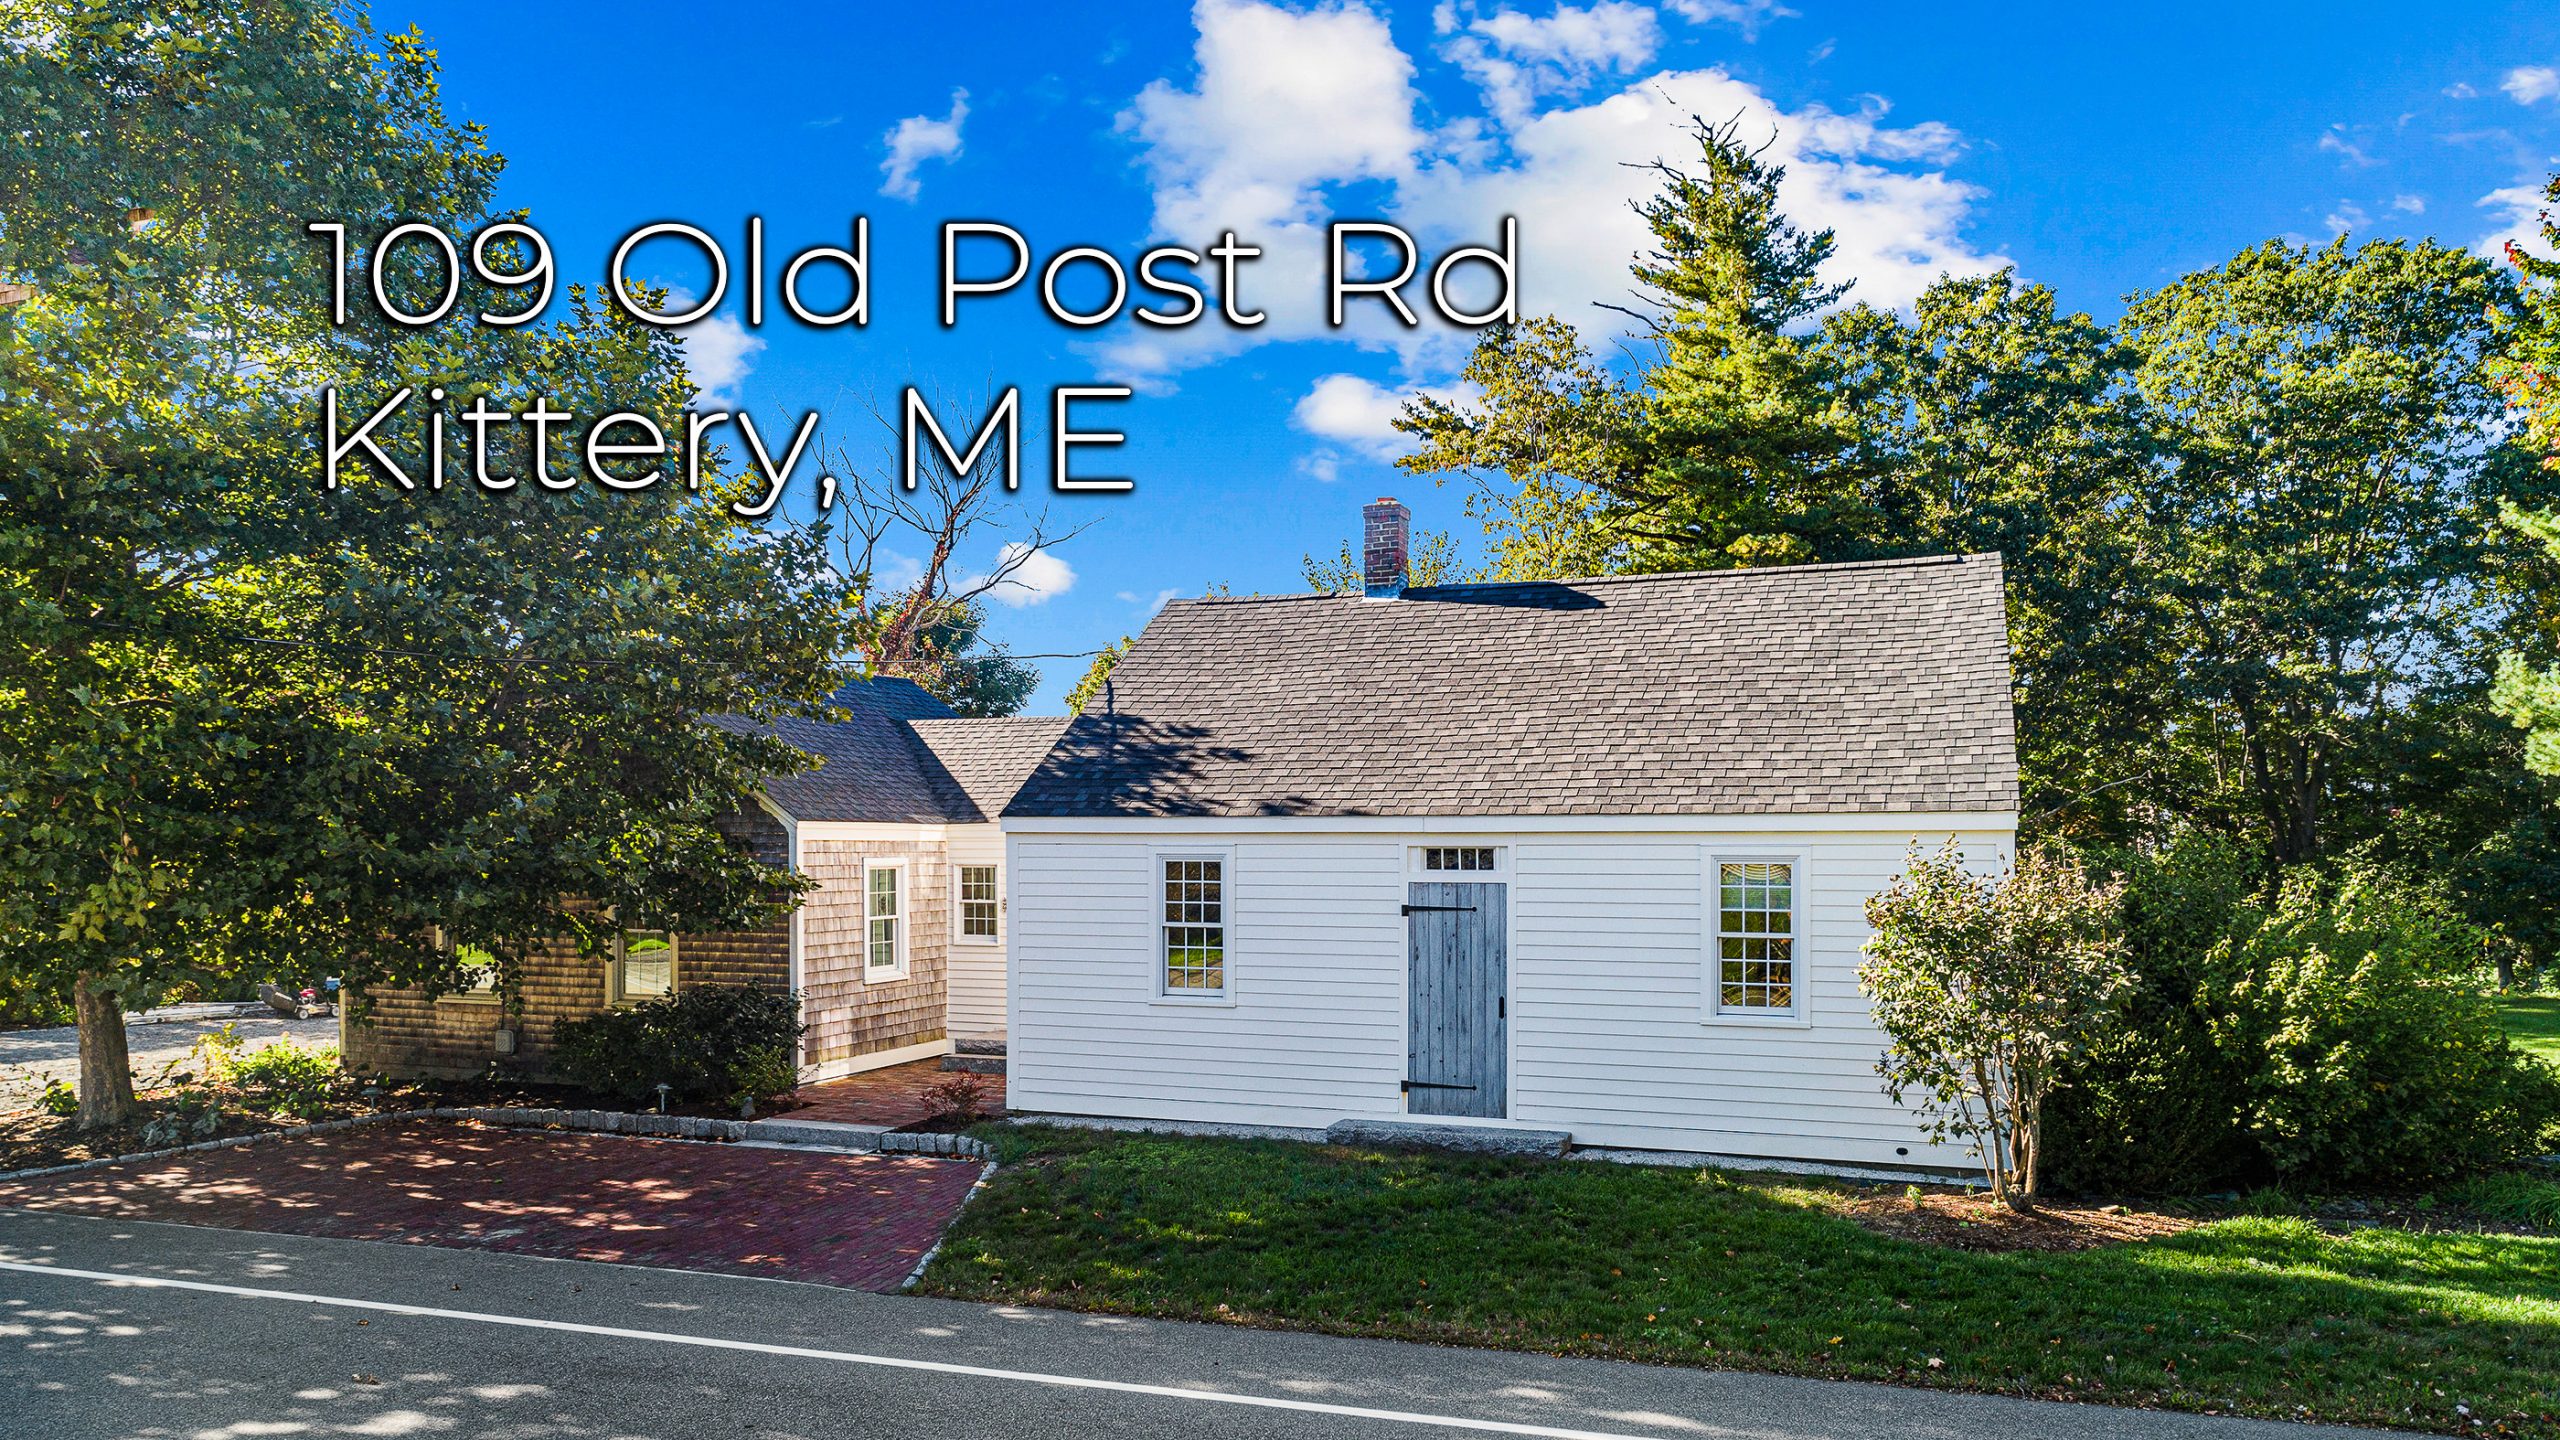 109 Old Post Rd Kittery ME 03904